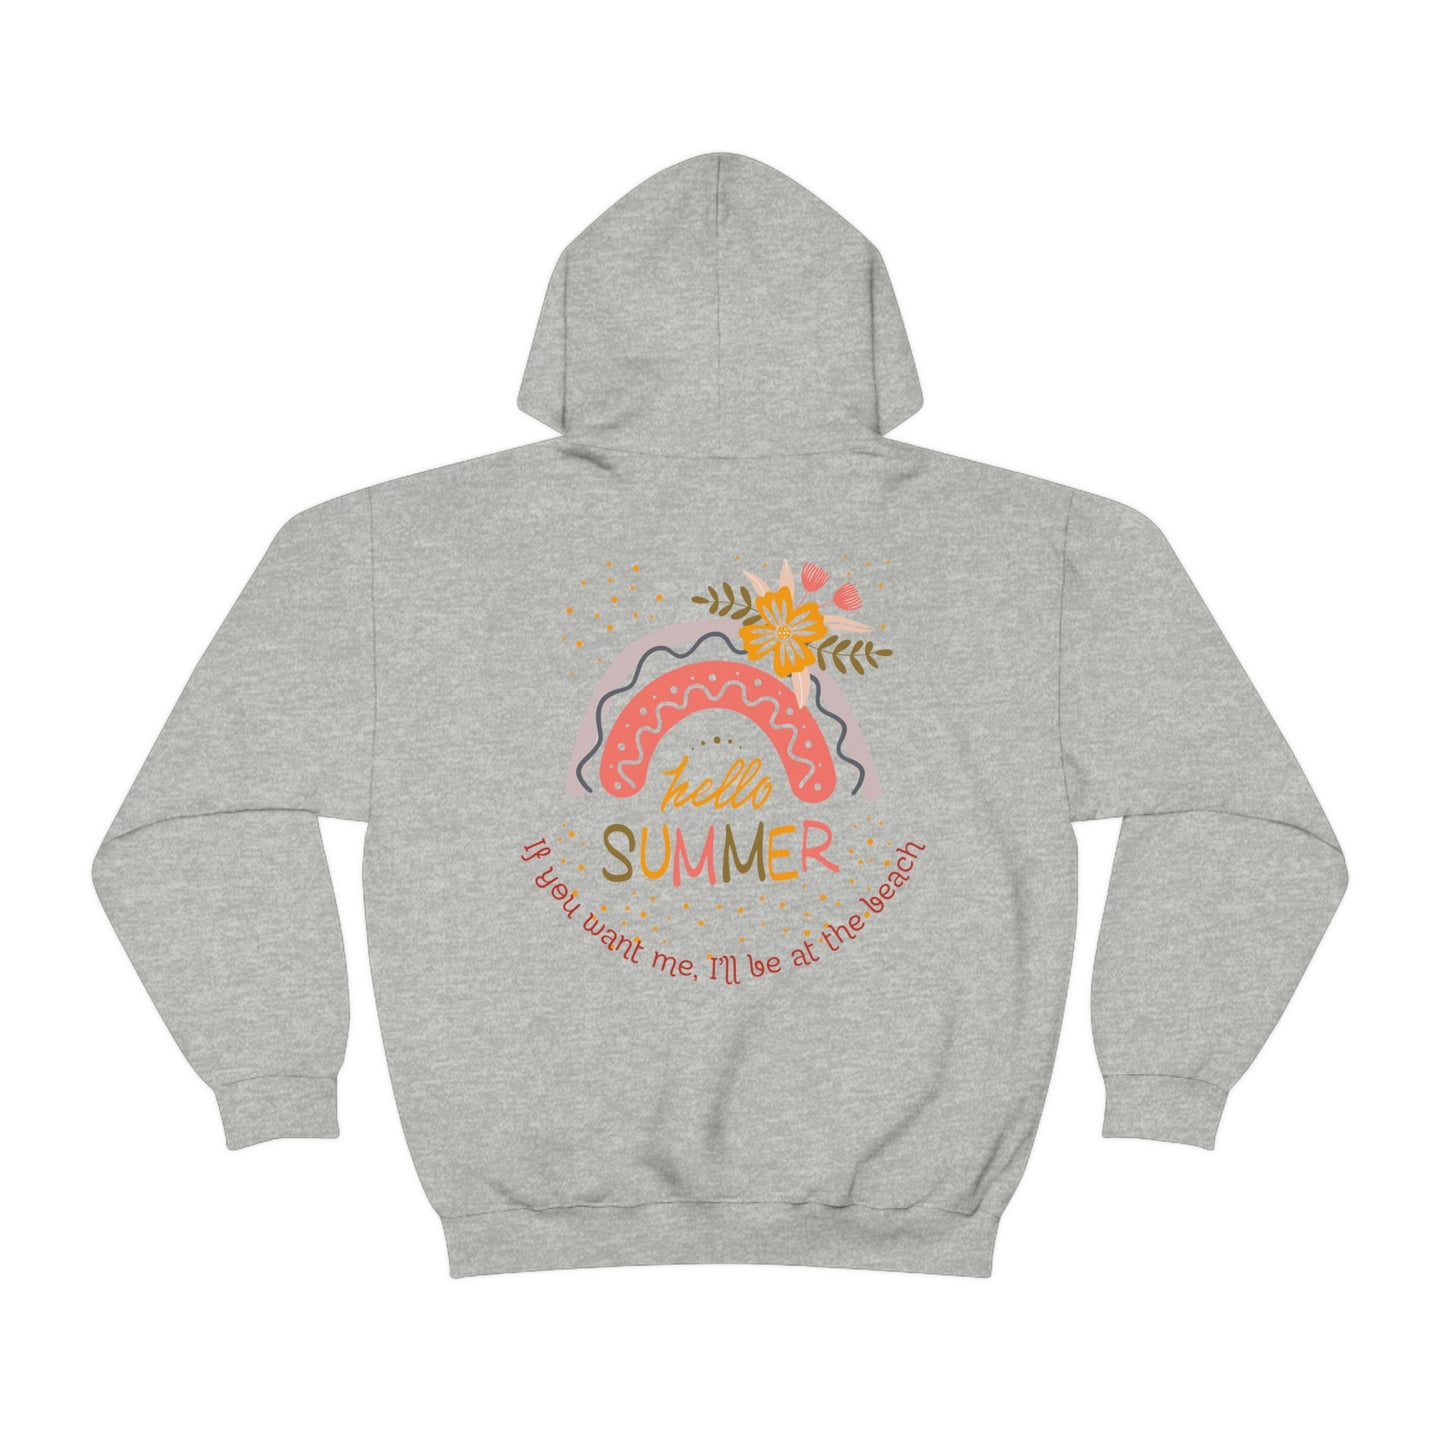 ‘If you want me, I’ll be at the beach’ Printed Front & Back. Unisex Heavy Blend™ Hooded Sweatshirt